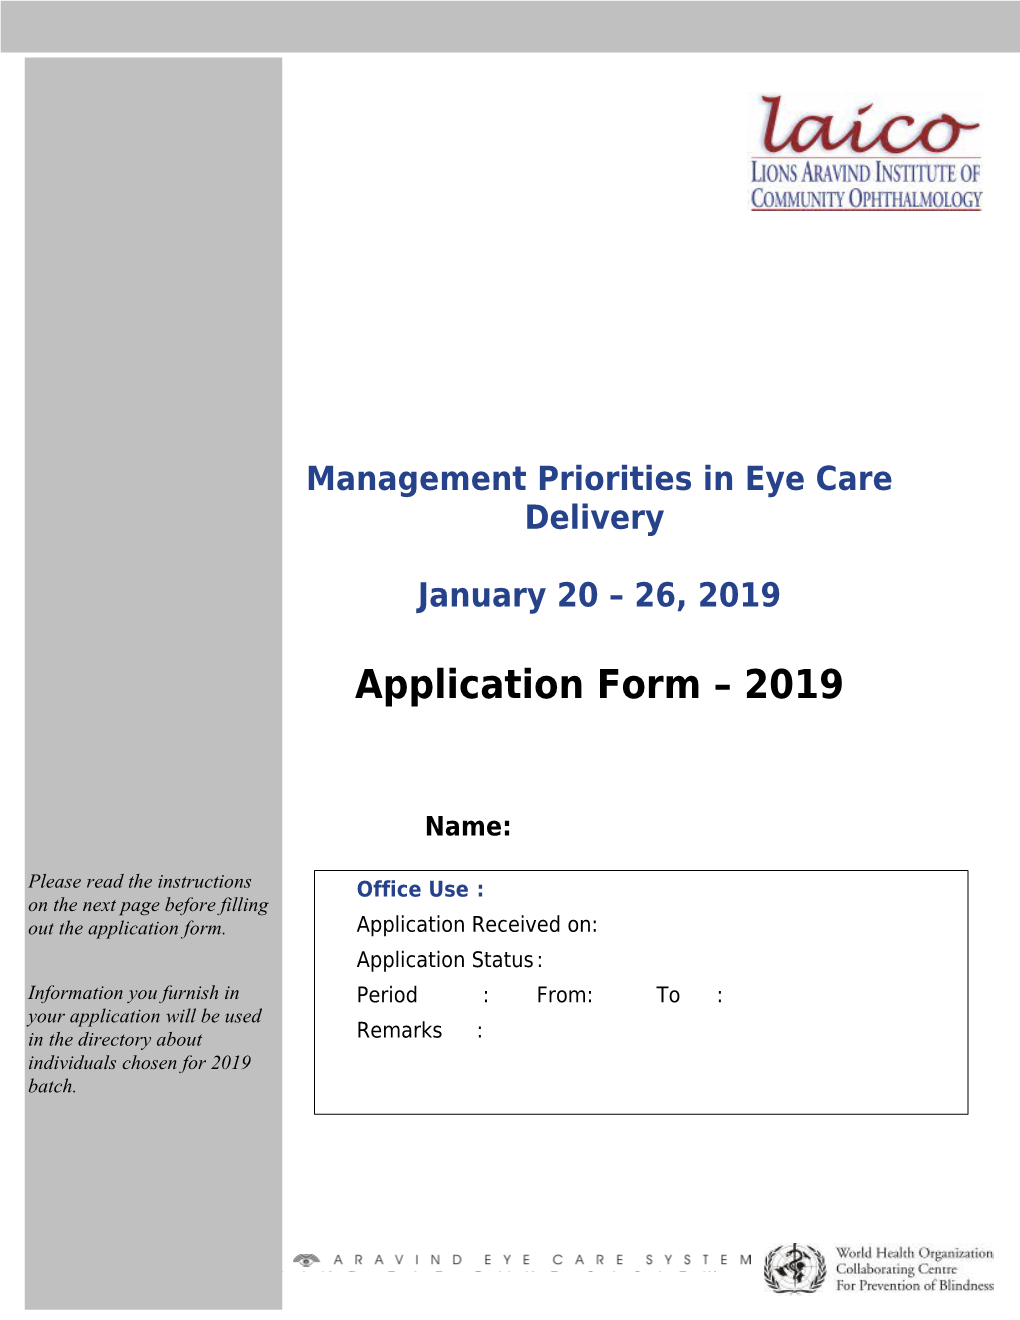 Management Priorities in Eye Care Delivery